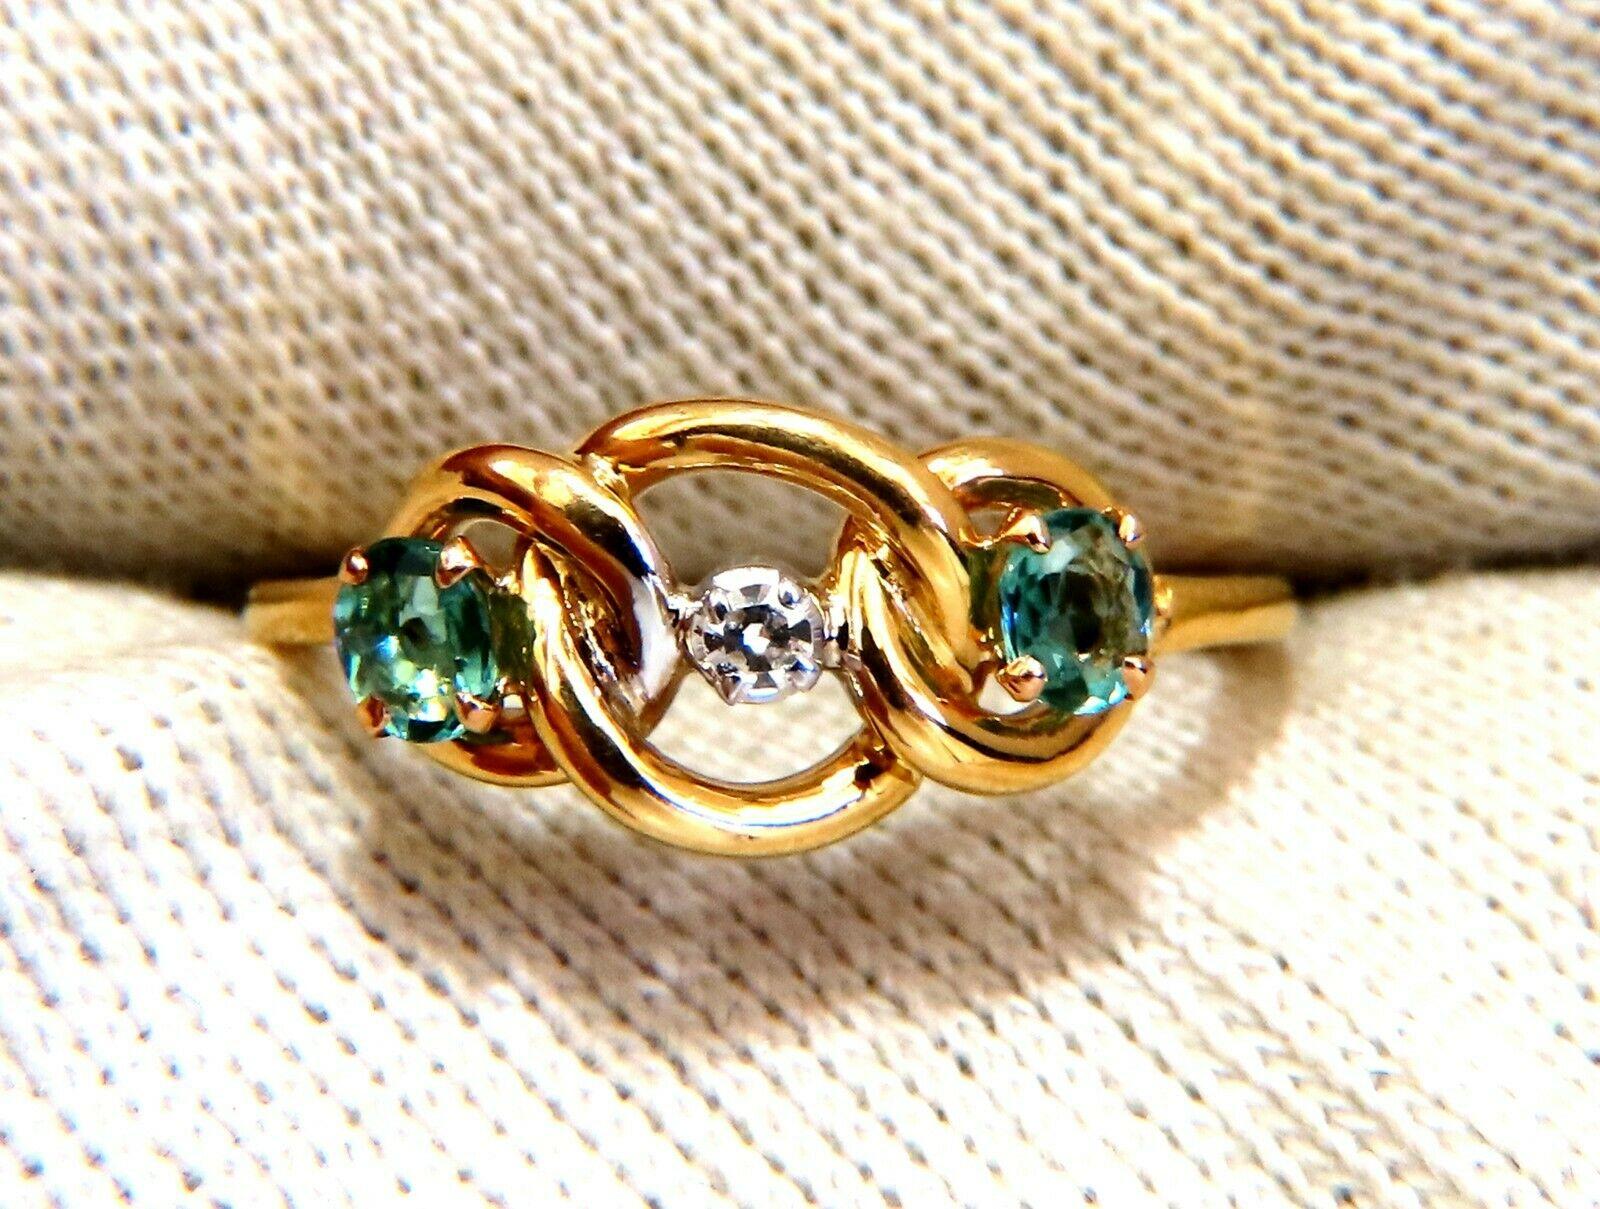 Infinity green aquamarine ring

.30 carat natural green aquamarines

.05 carat natural diamond

18 karat yellow gold 2.5 g

Ring is 8 mm wide

Depth 3 mm

Current size 6.5 and we may resize please inquire